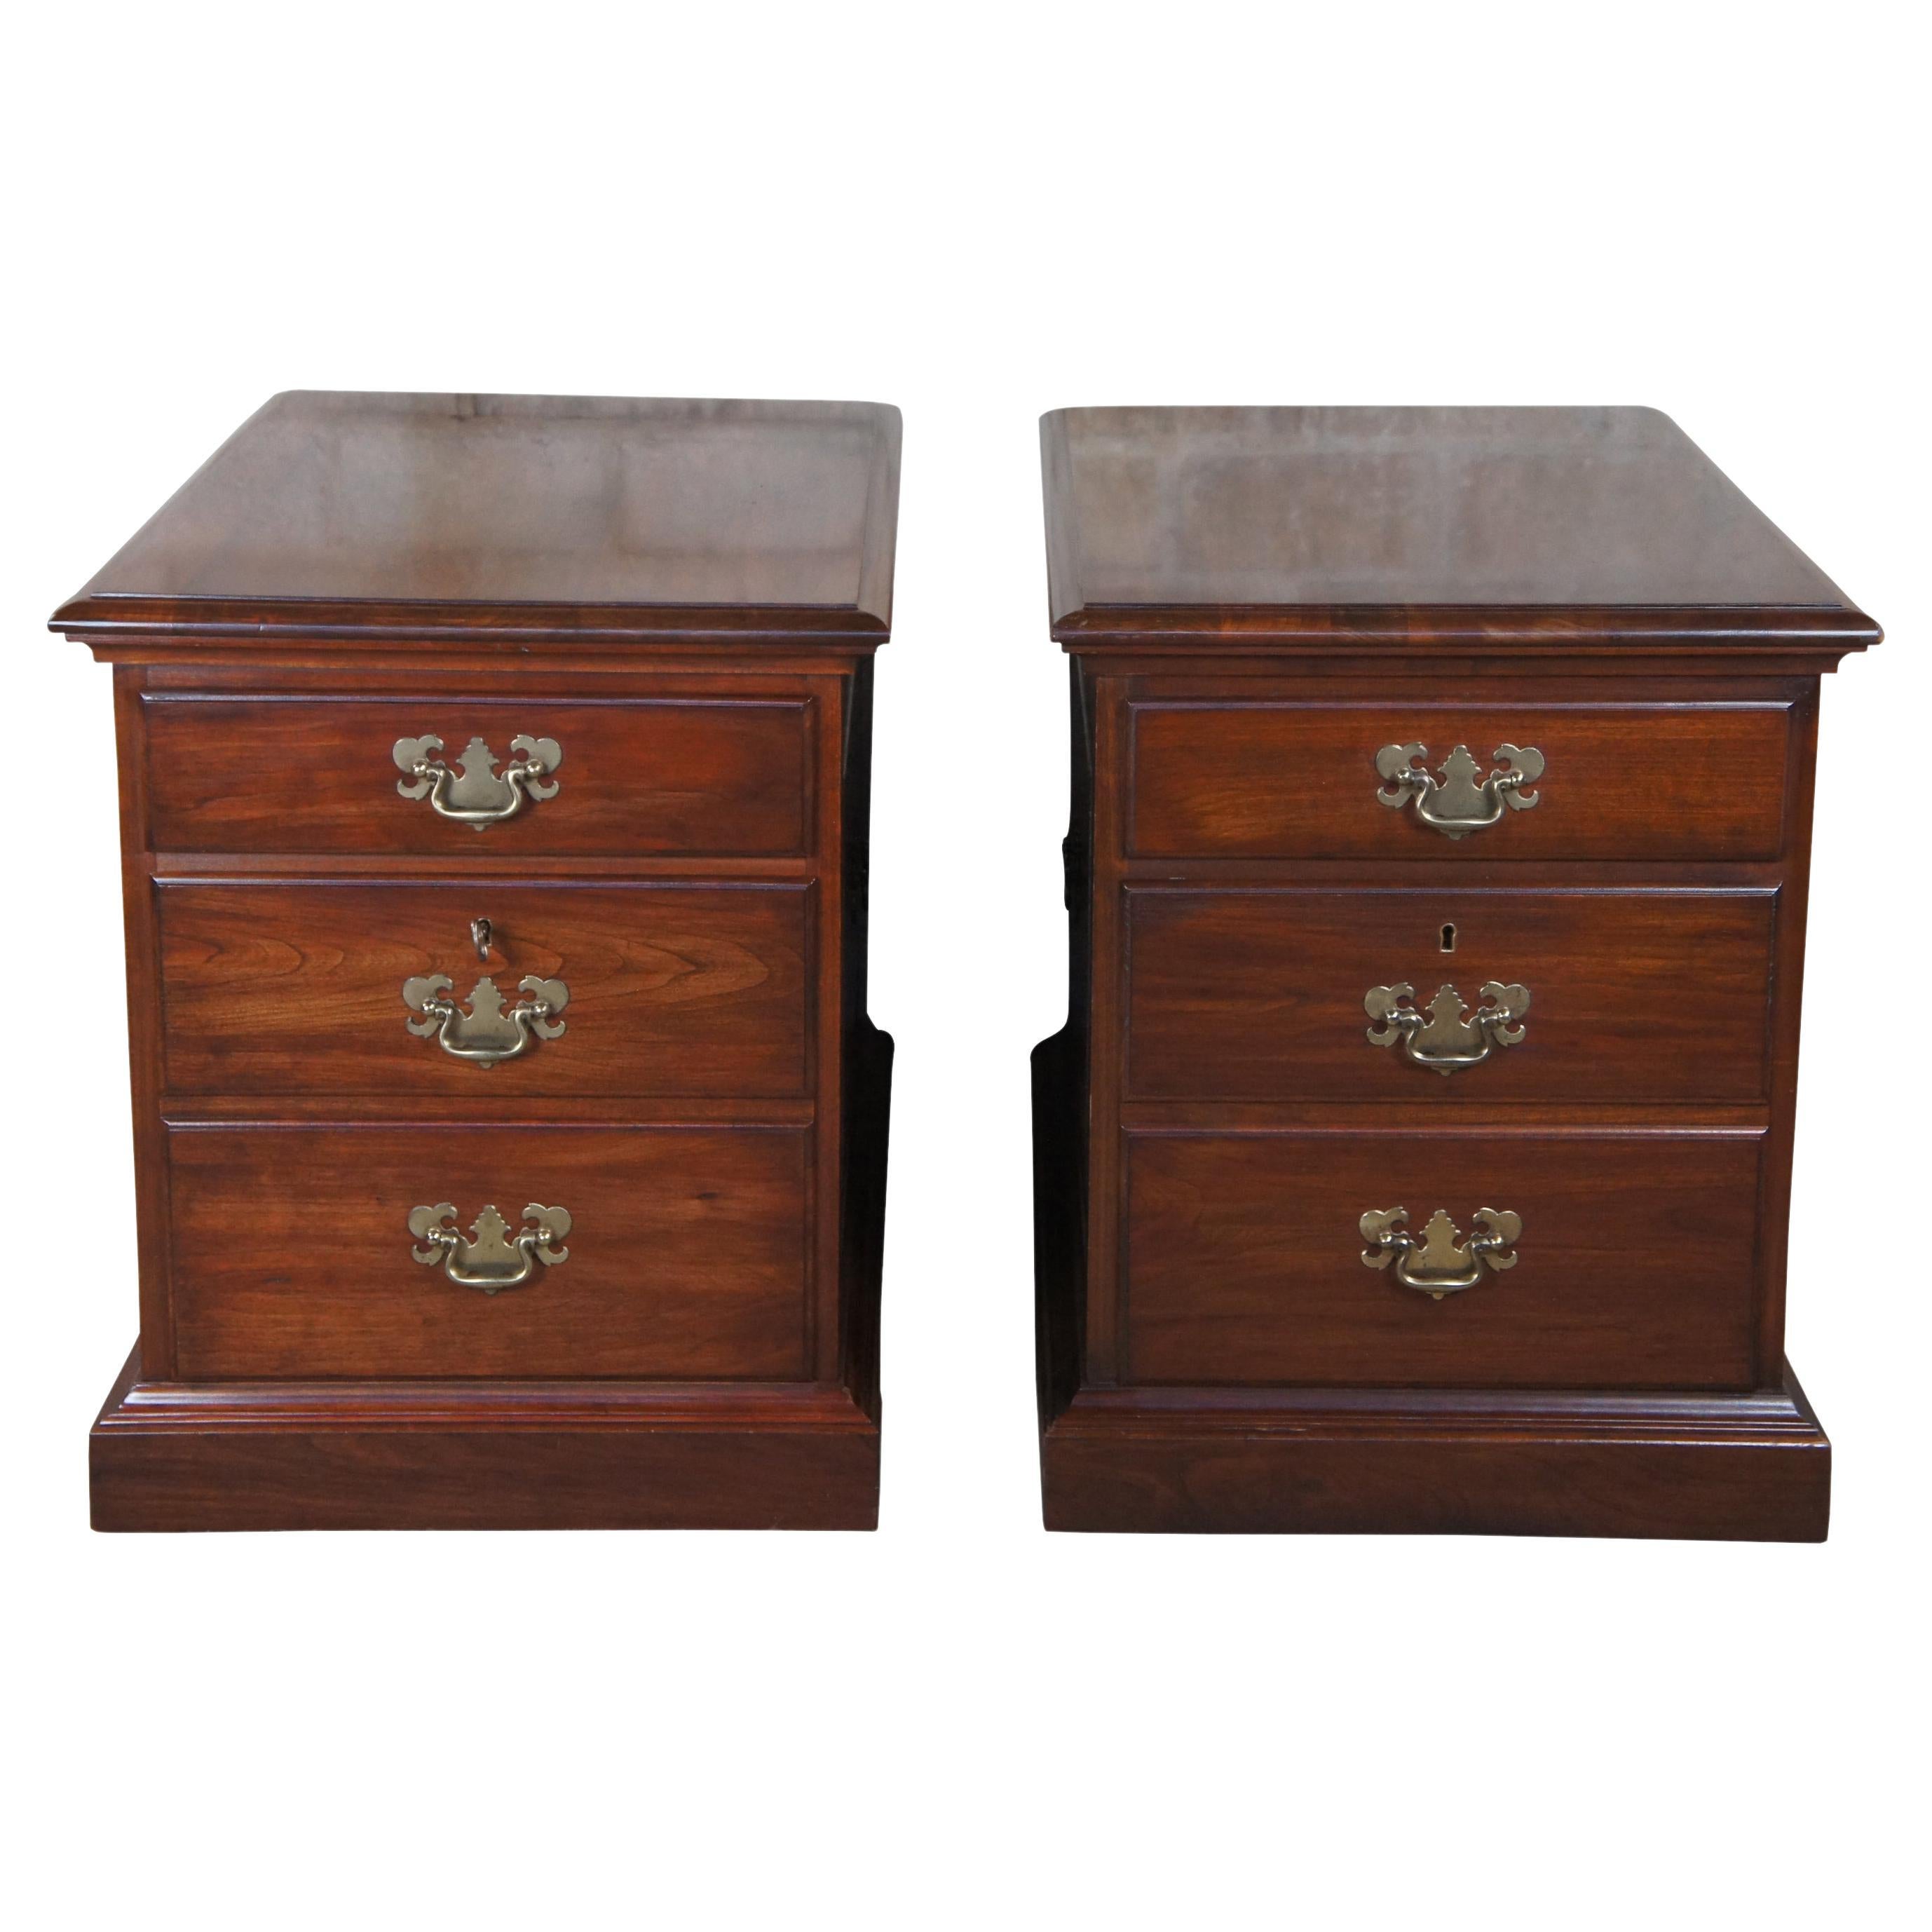 2 Vintage Pennsylvania House Georgian Style Cherry File Cabinets Accent Tables